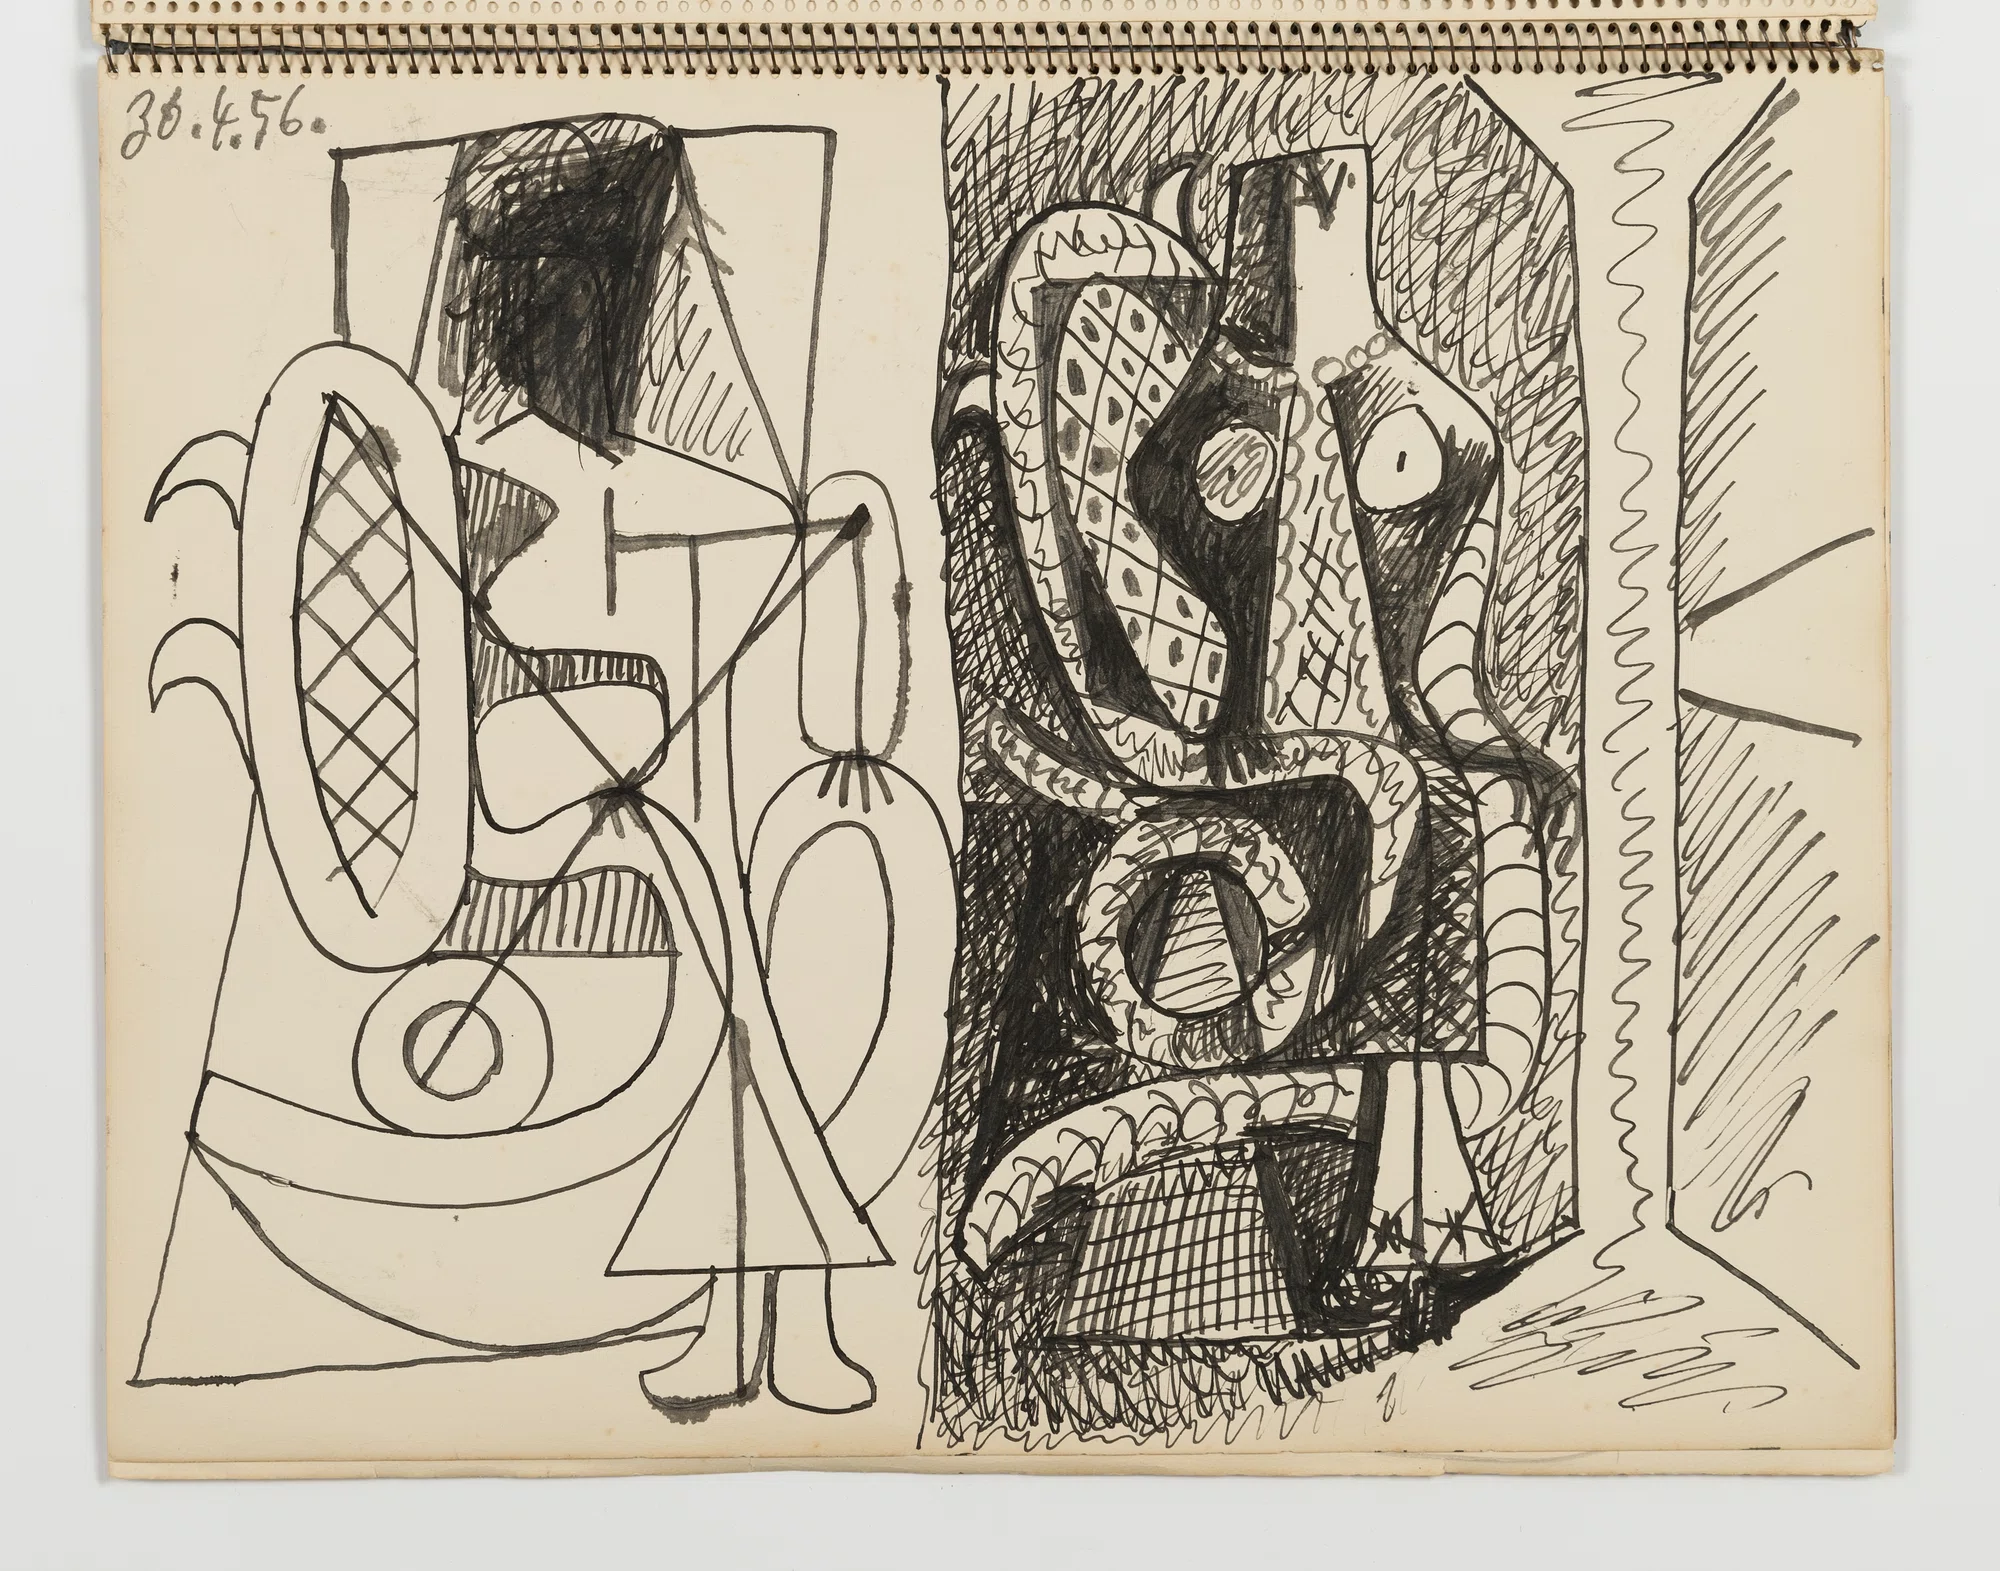 Announcing Picasso: 14 Sketchbooks, 1900-1959